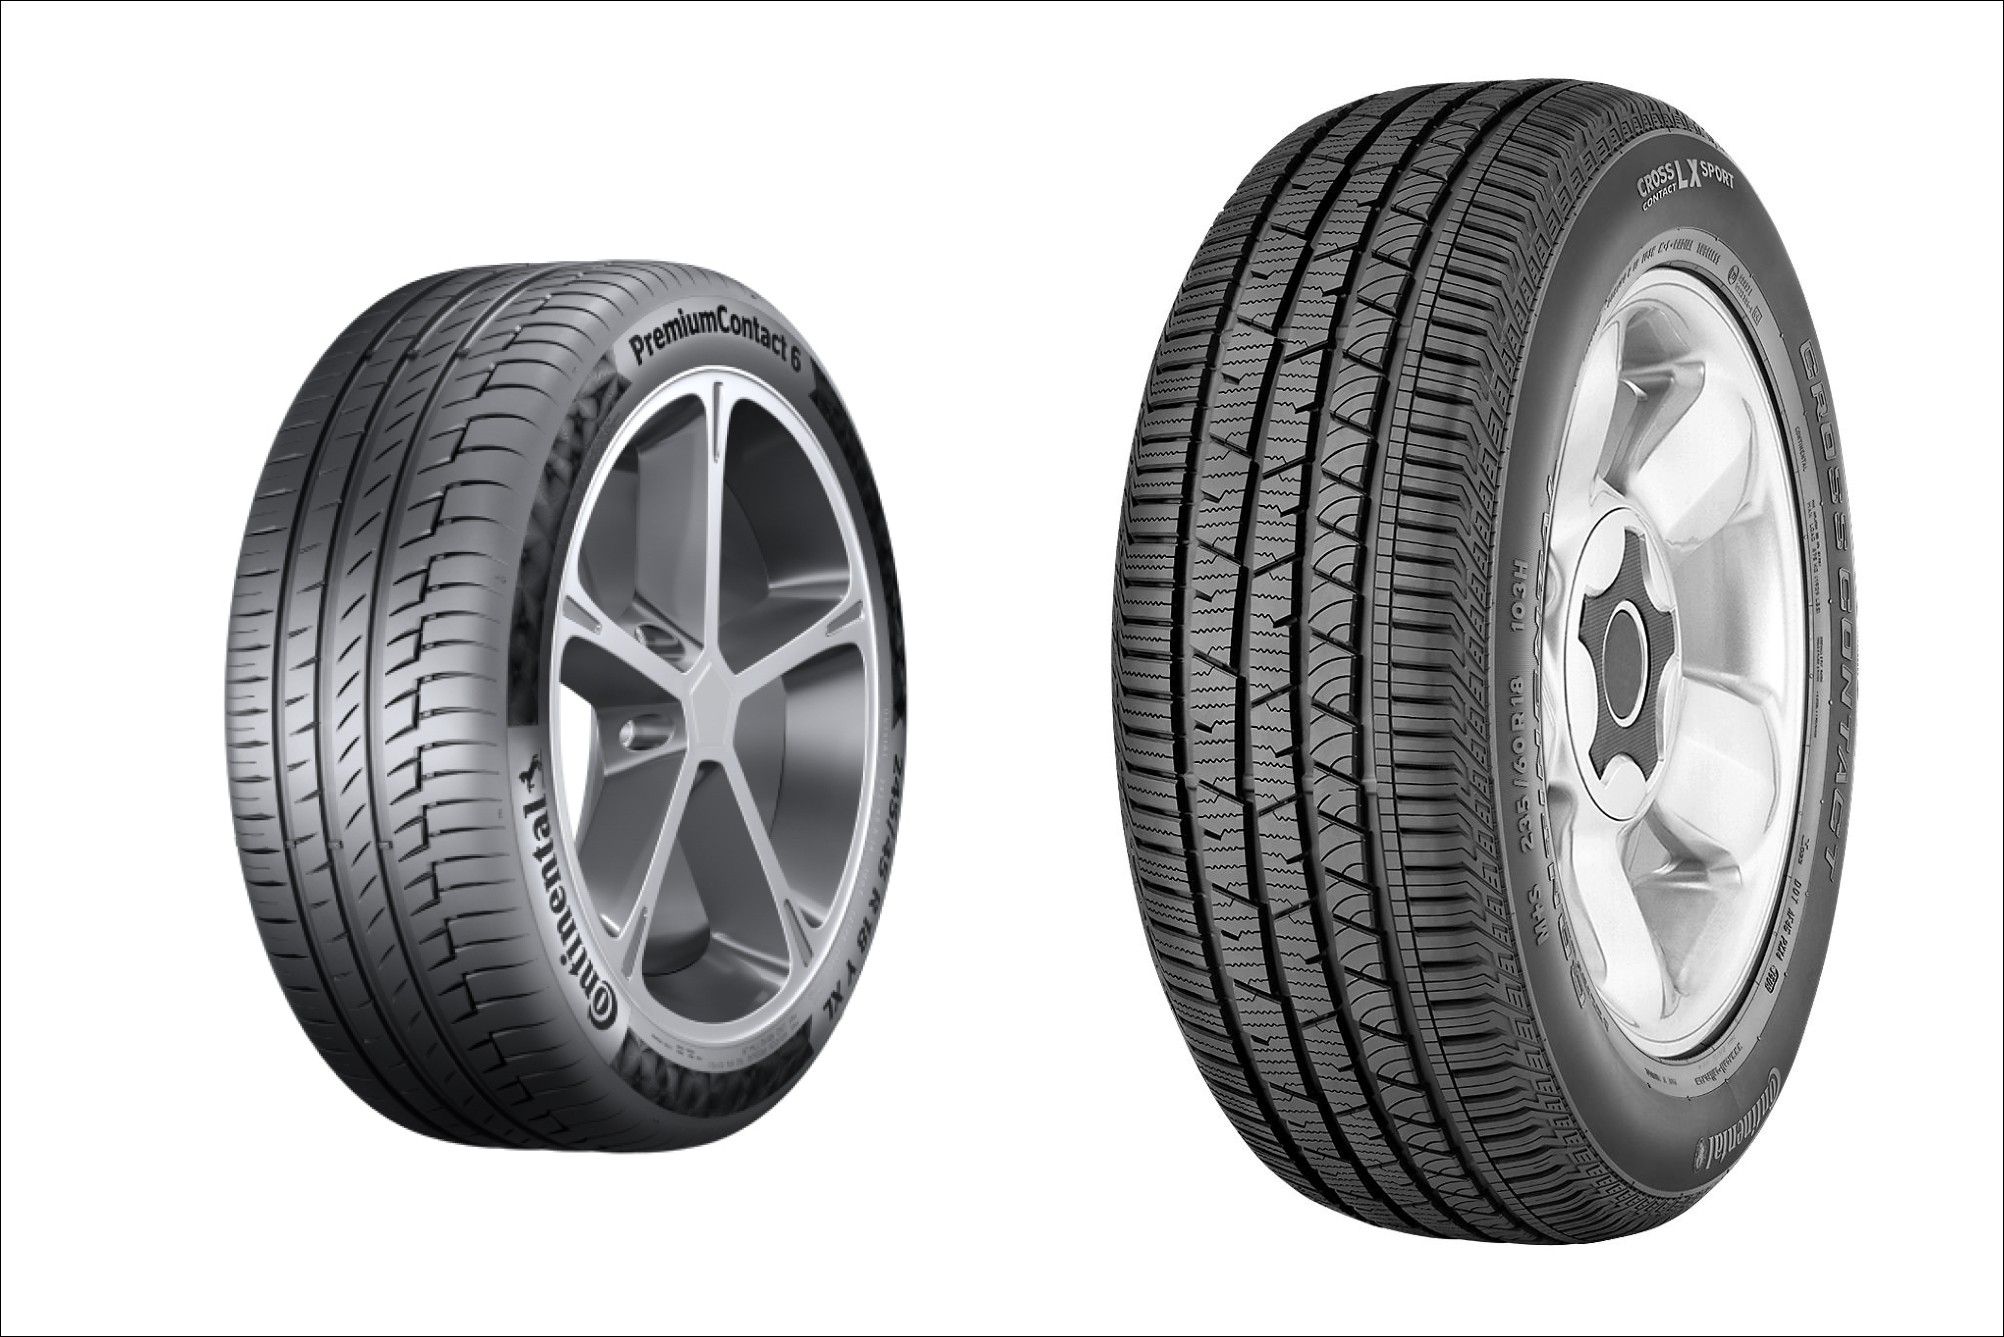 Hyundai Tucson is certified with continental tires for global performance